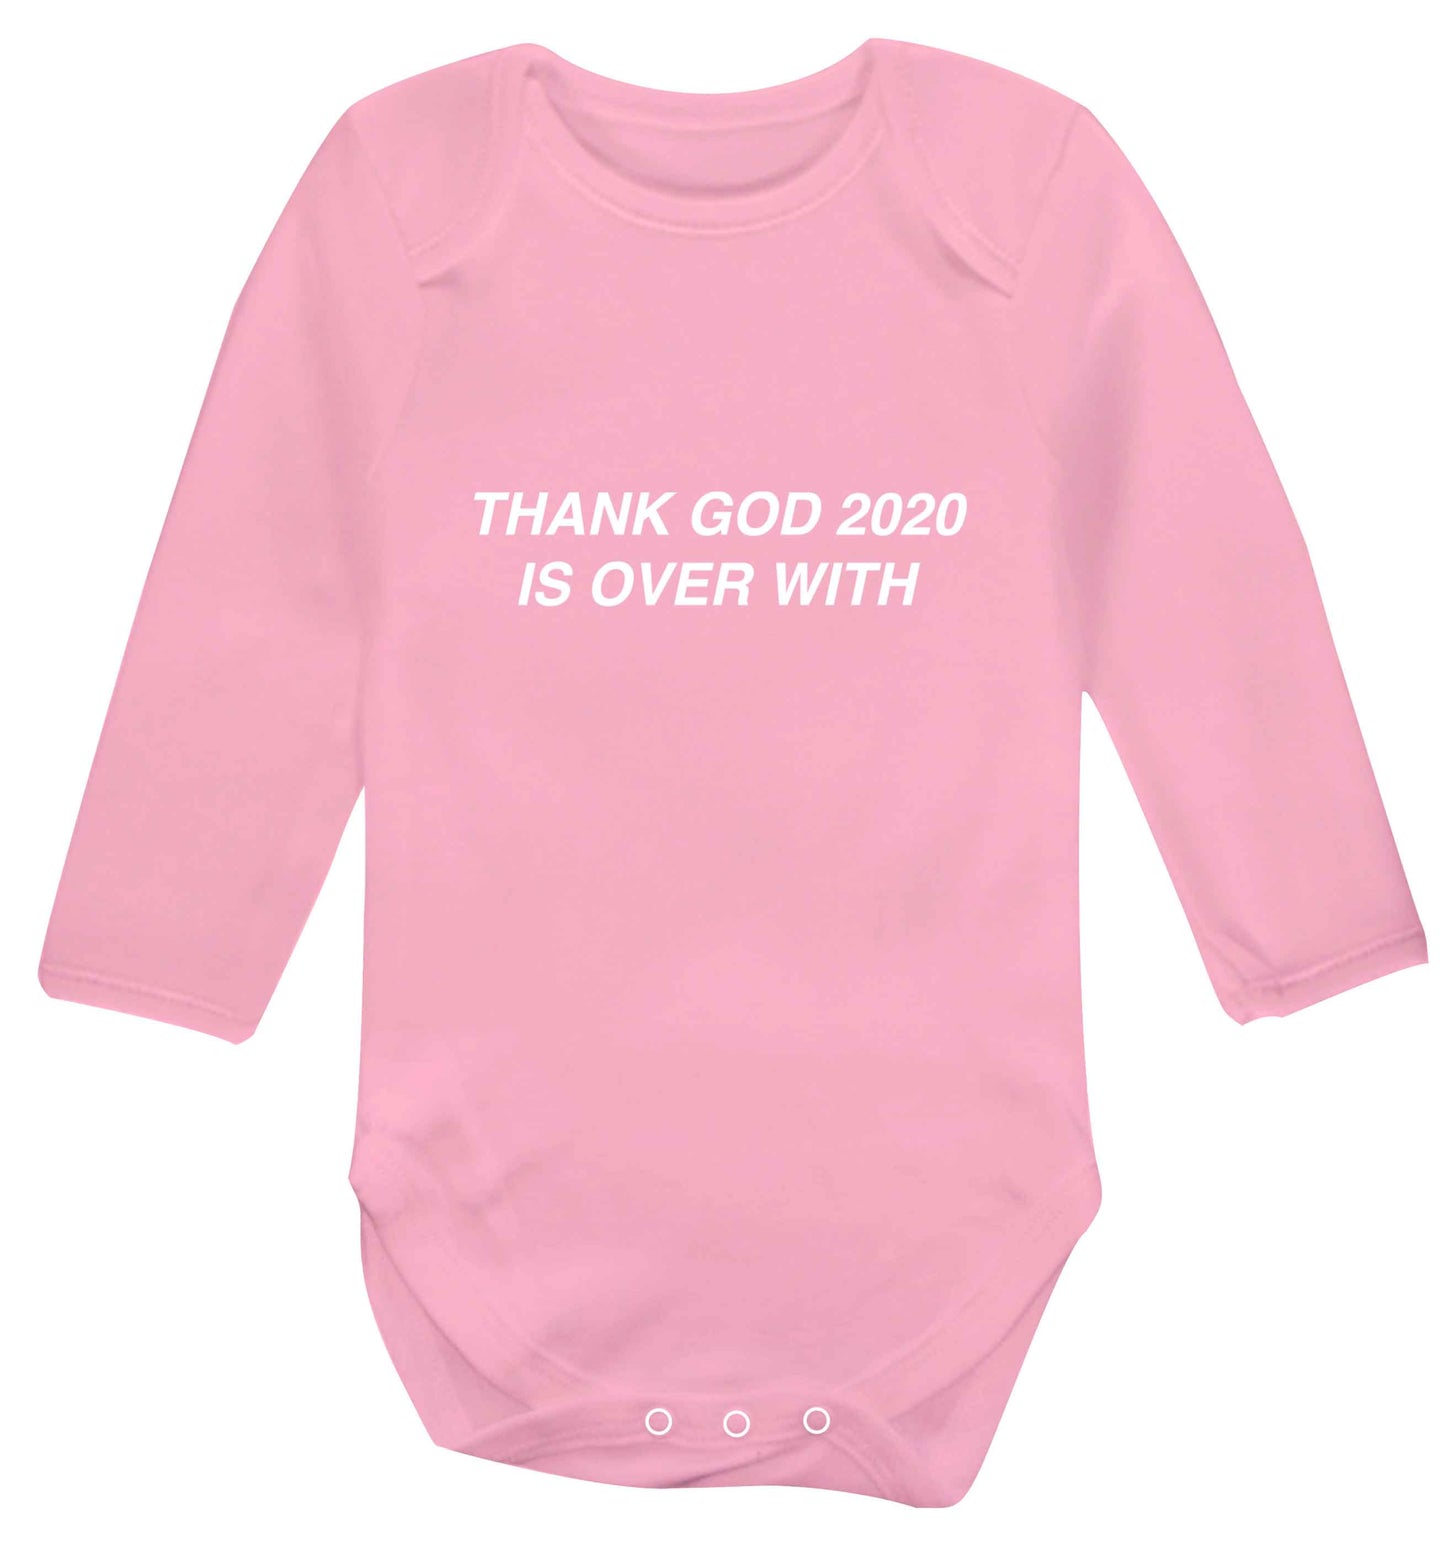 Thank god 2020 is over with baby vest long sleeved pale pink 6-12 months